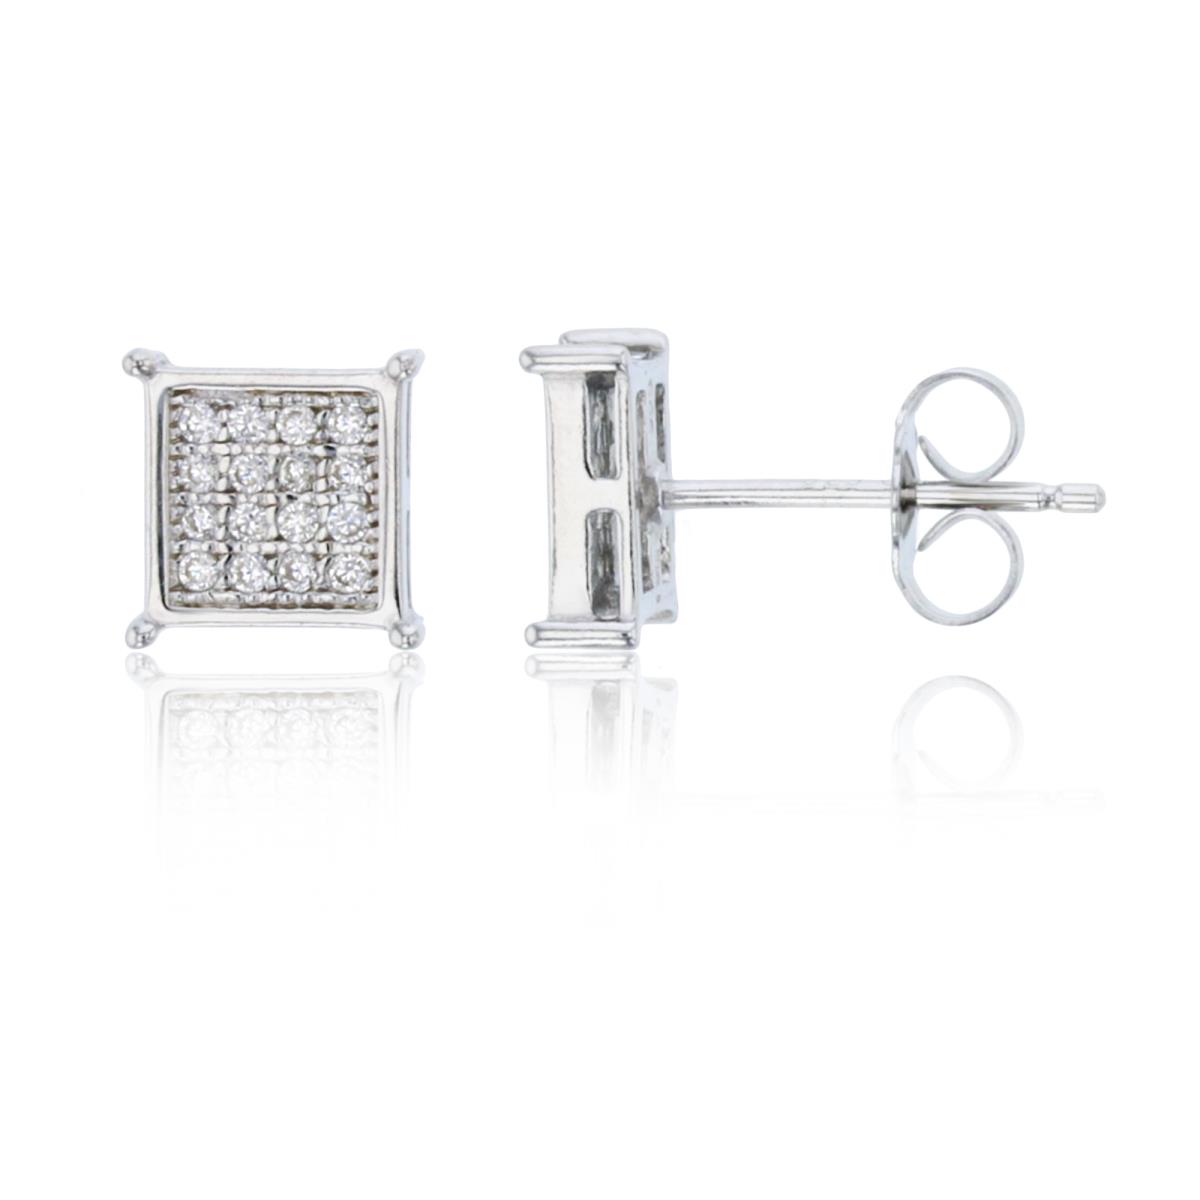 Sterling Silver 8mm Micropave Square Stud Earring